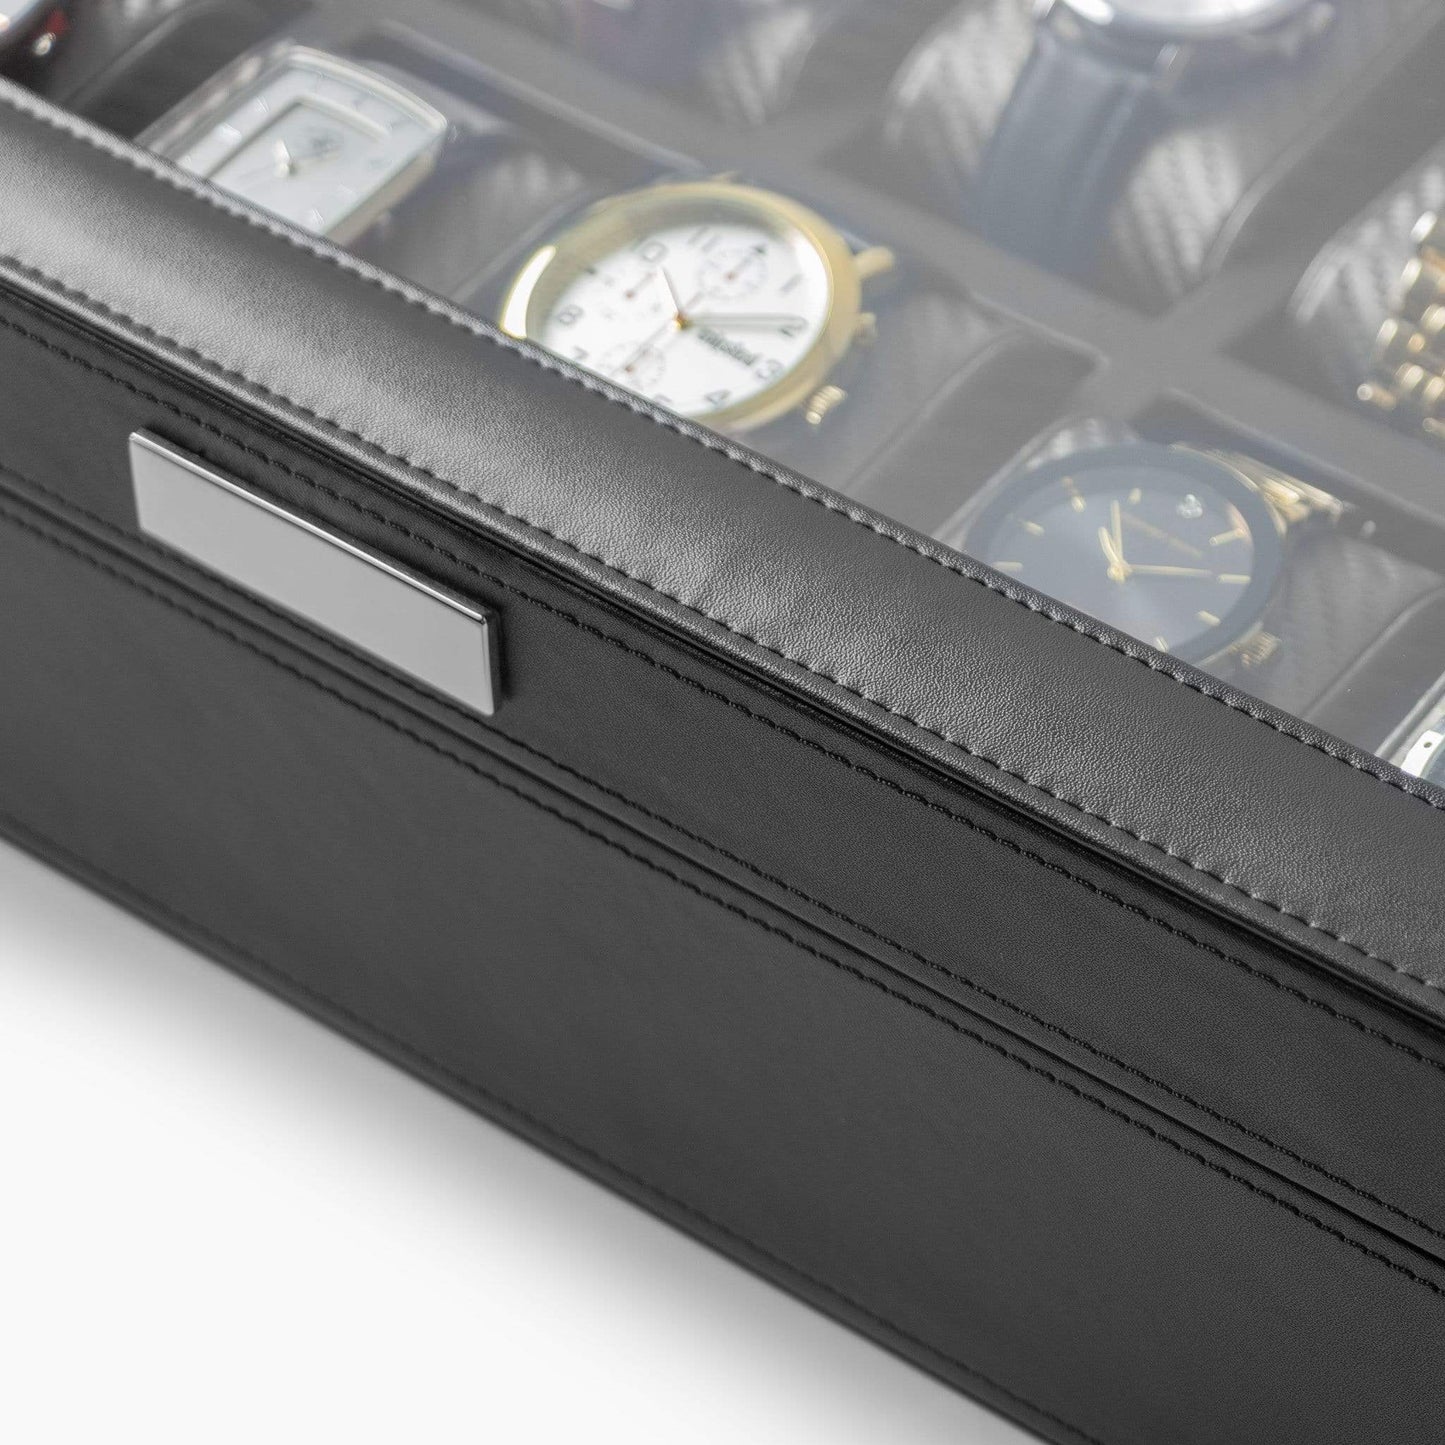 HOUNDSBAY Watch Box The Mariner - Watch Display Box with Carbon Fiber Patterned Interior - 10 Watches